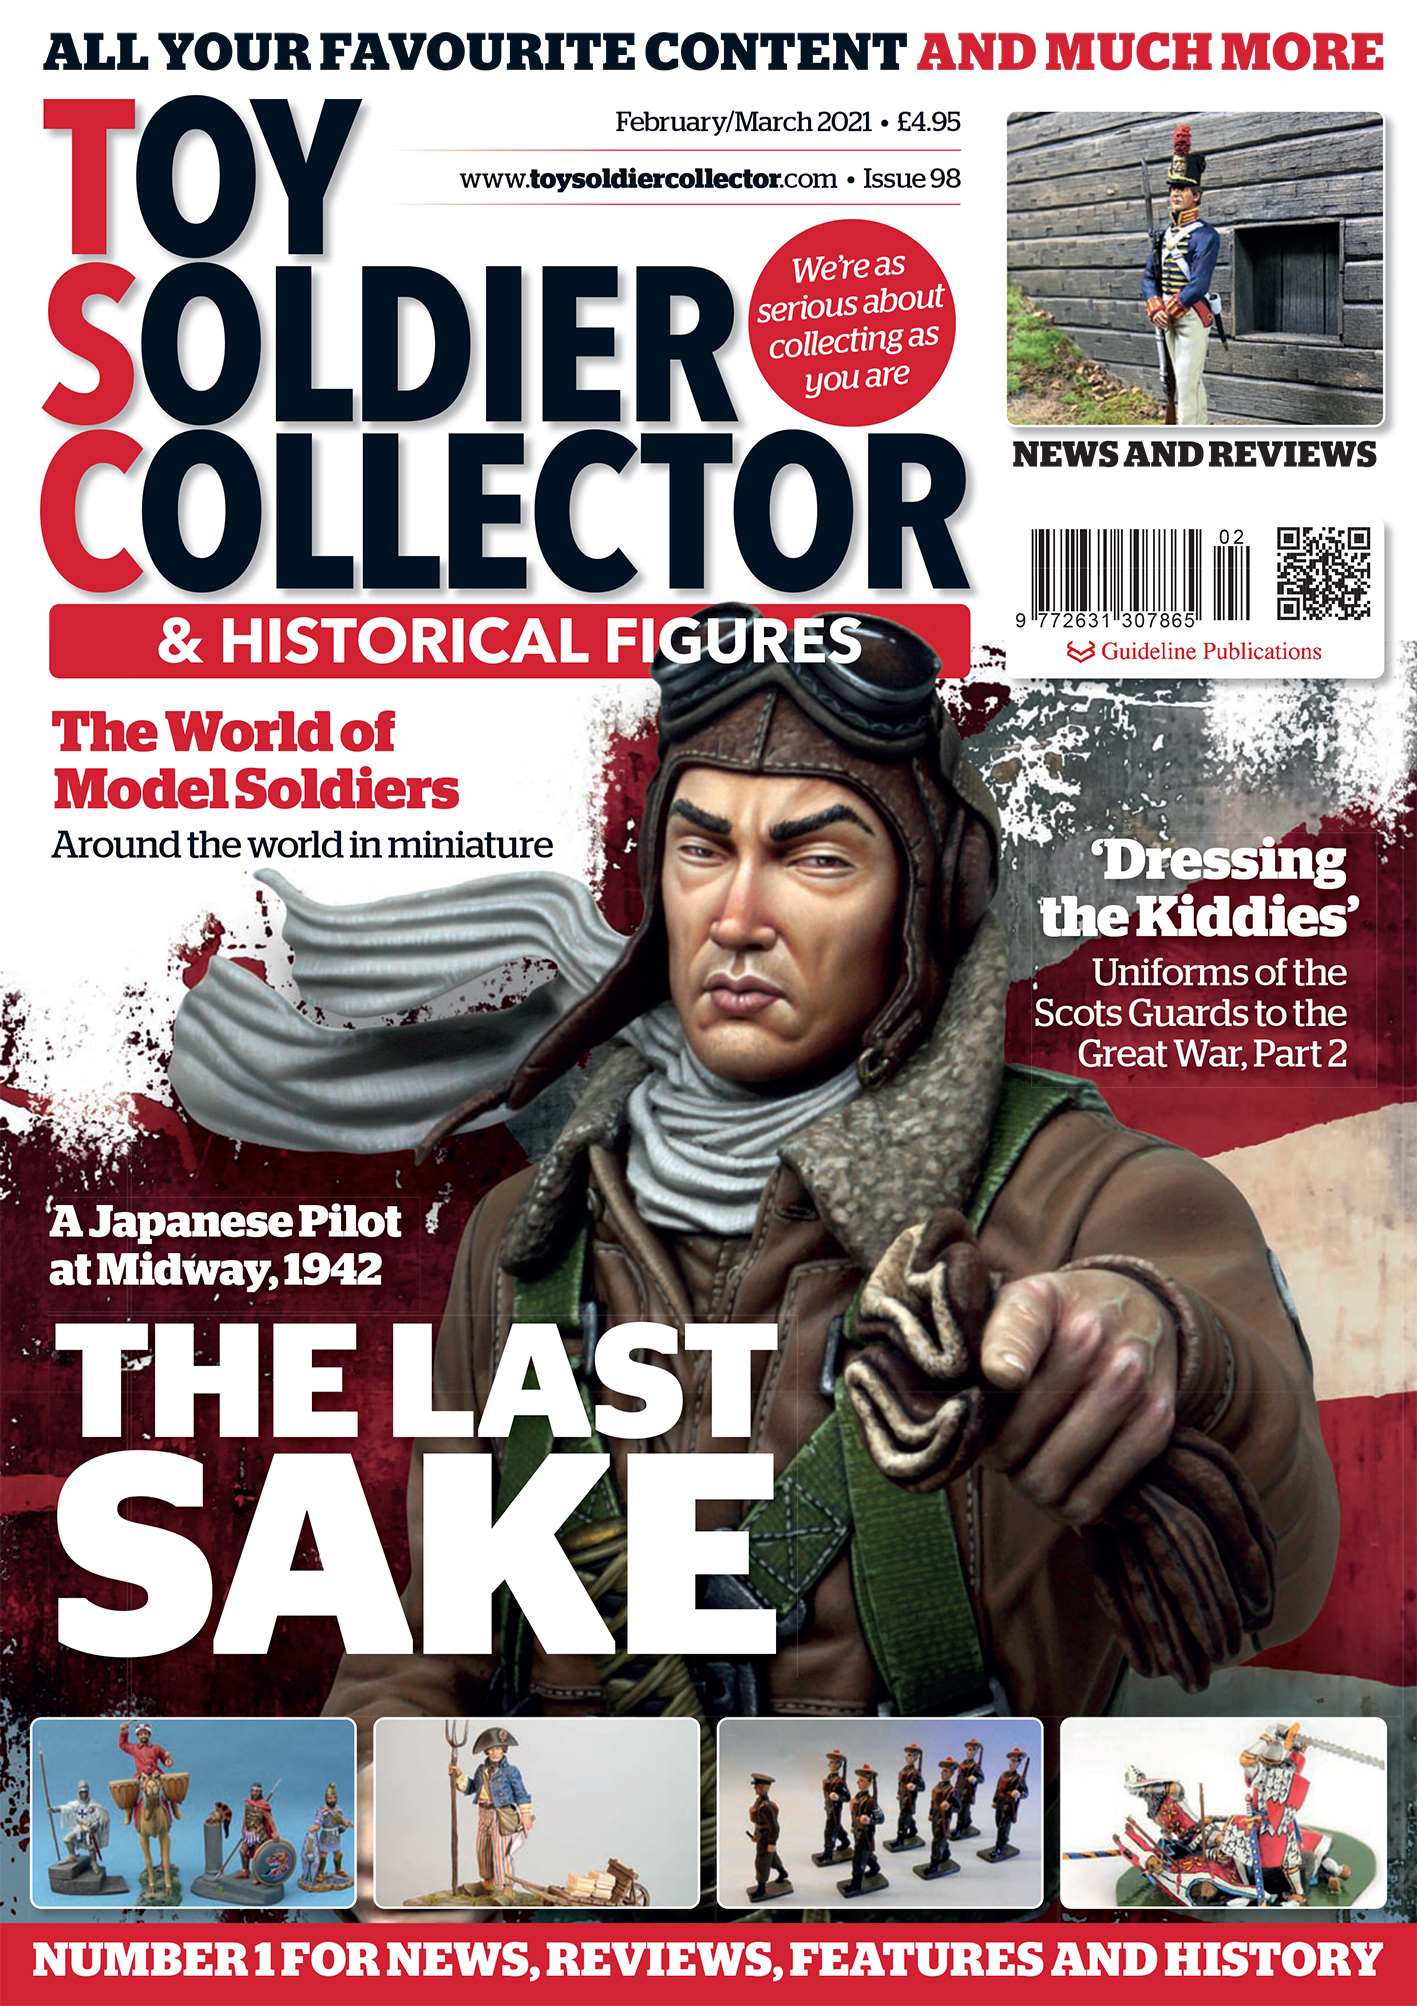 October & November 2015 Toy Soldier Collector Magazine 66 